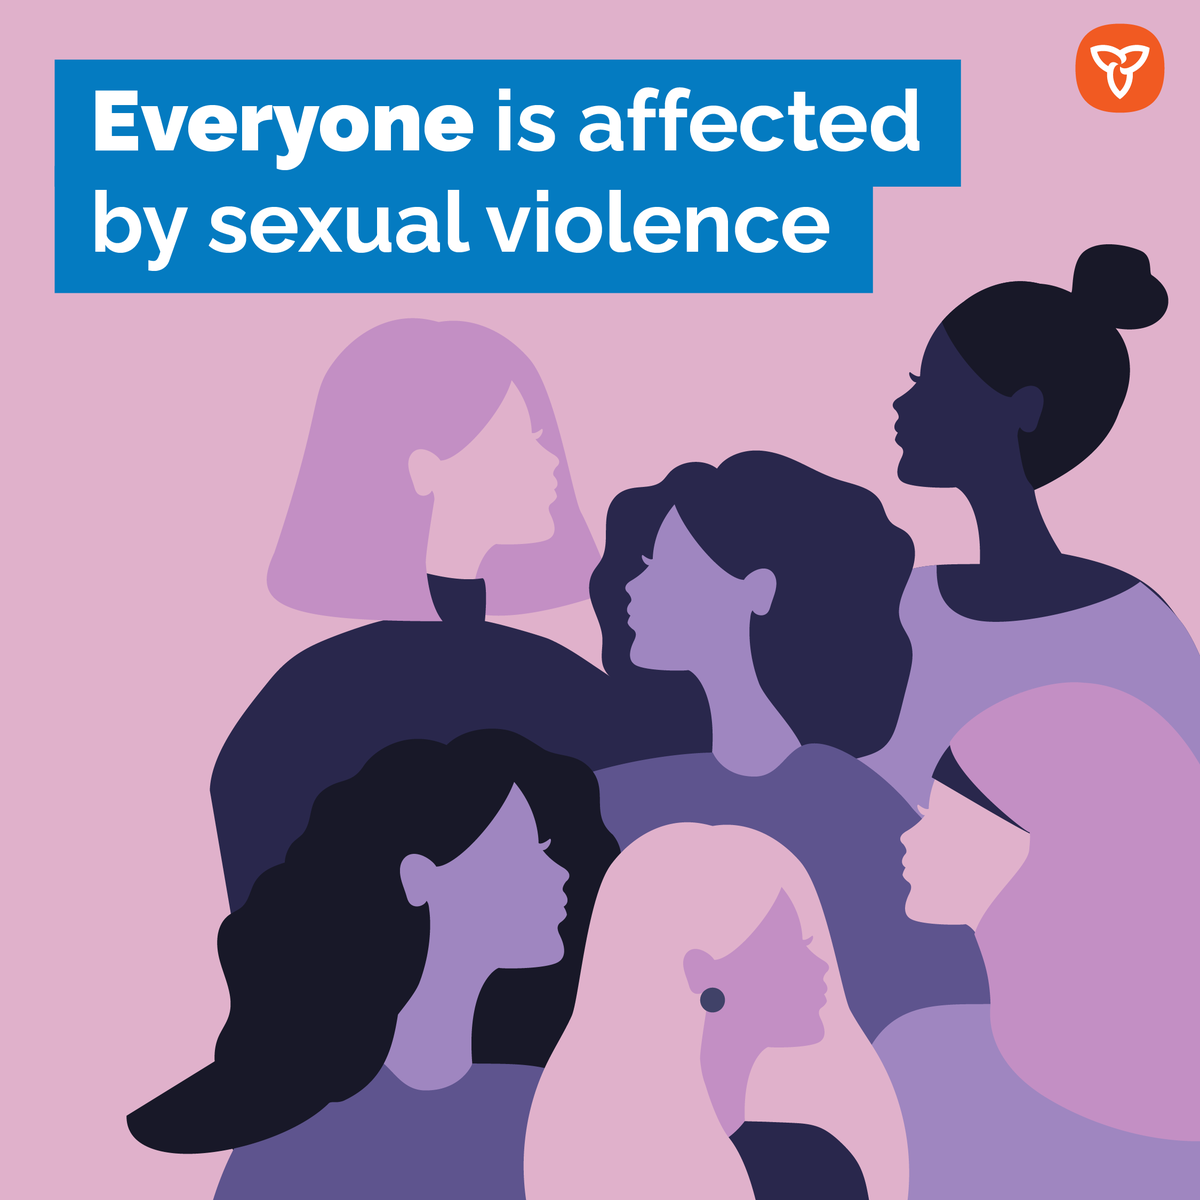 Who is affected by sexual violence? Sexual violence crosses all social boundaries, affects people of every age and cultural background, and has devastating impacts on the lives of survivors and their families, as well as the well-being of society. ontario.ca/page/sexual-vi…